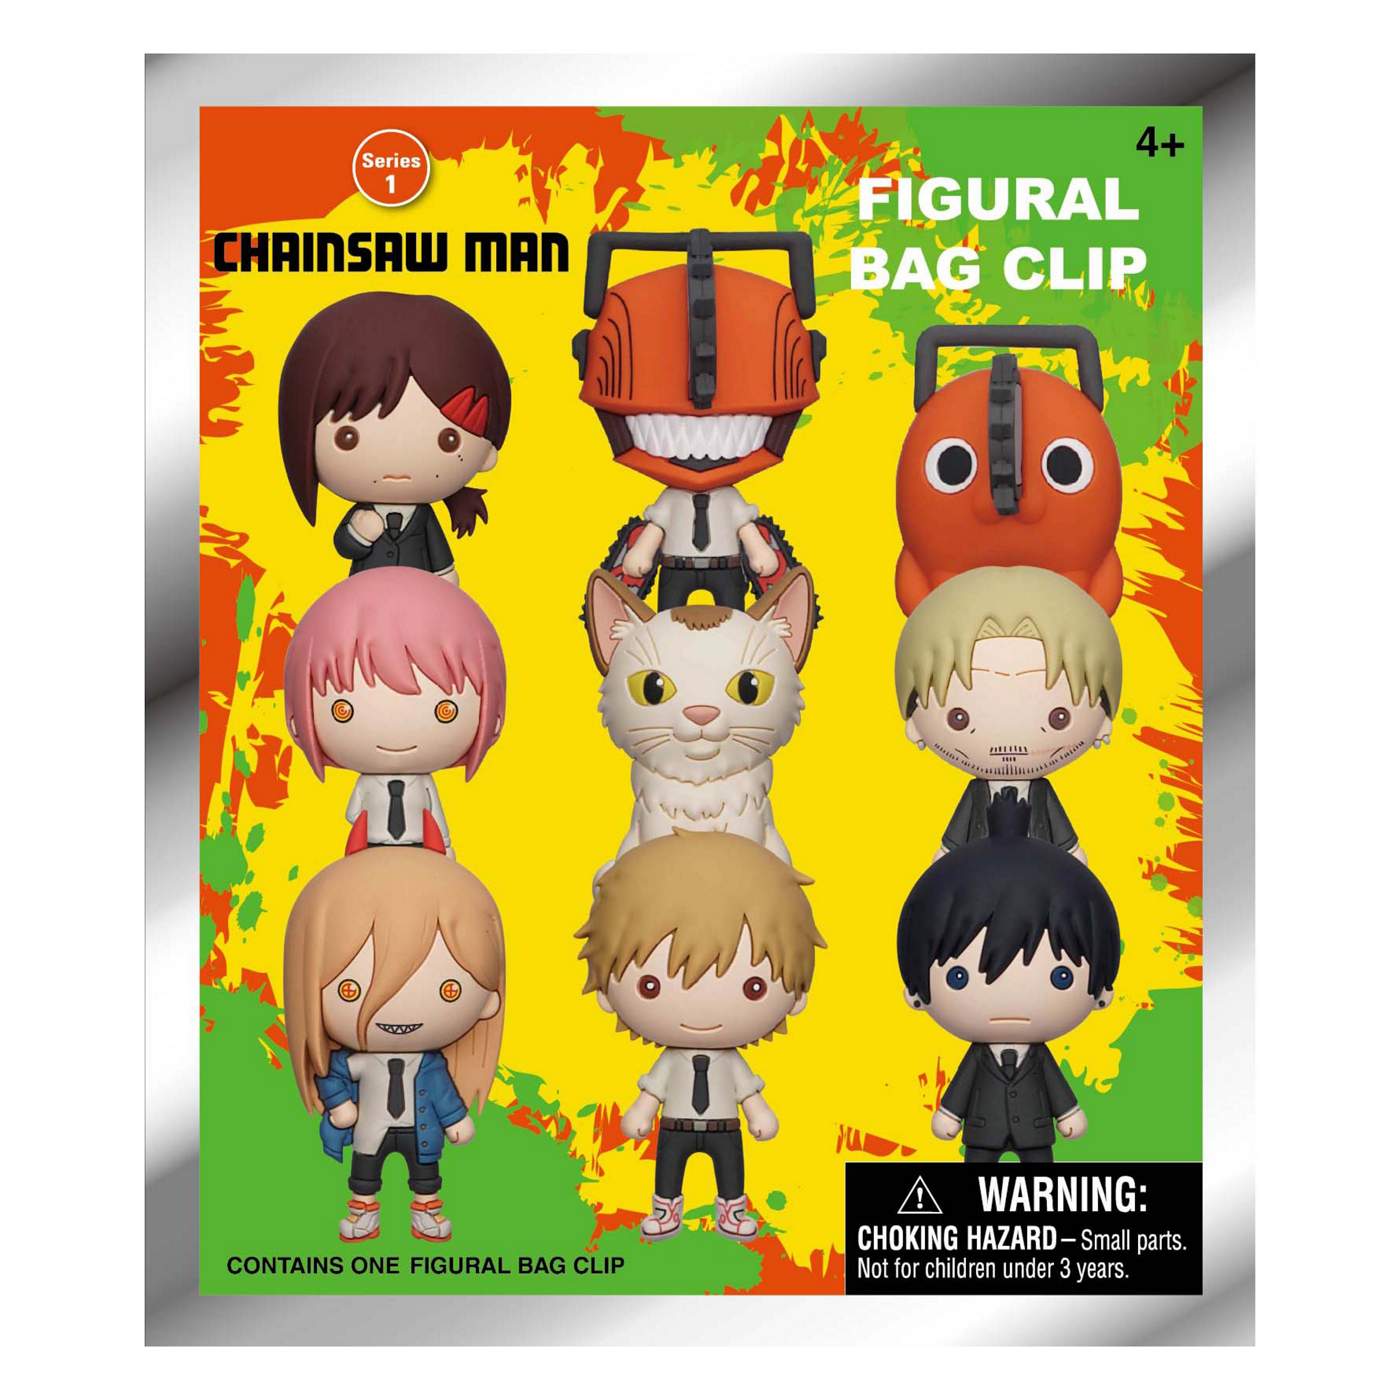 Chainsaw Man Mystery Figural Bag Clip - Series 1; image 1 of 2